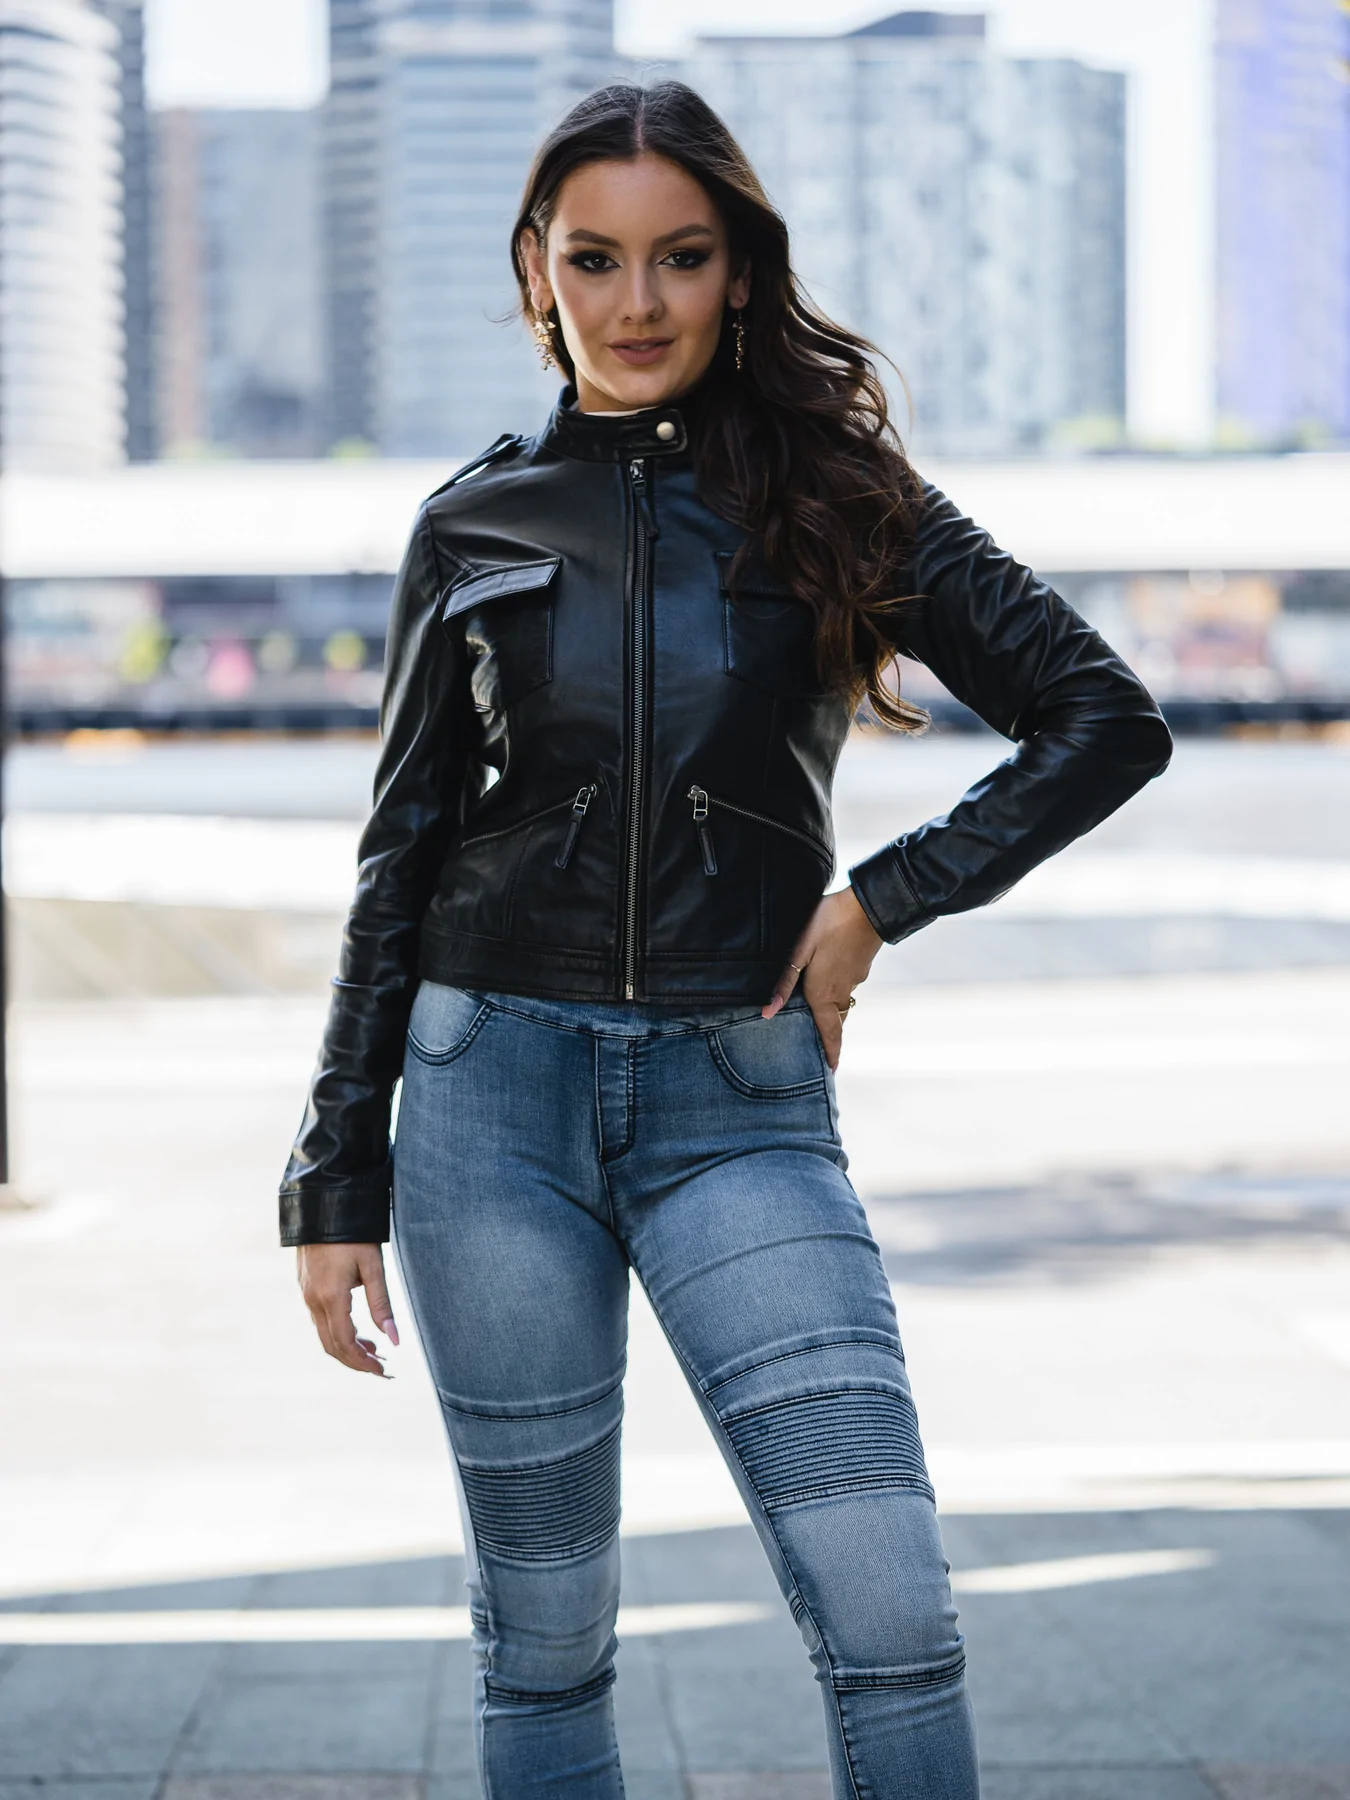 Front Close Zip Look of Black Leather Jacket Womens Outfit